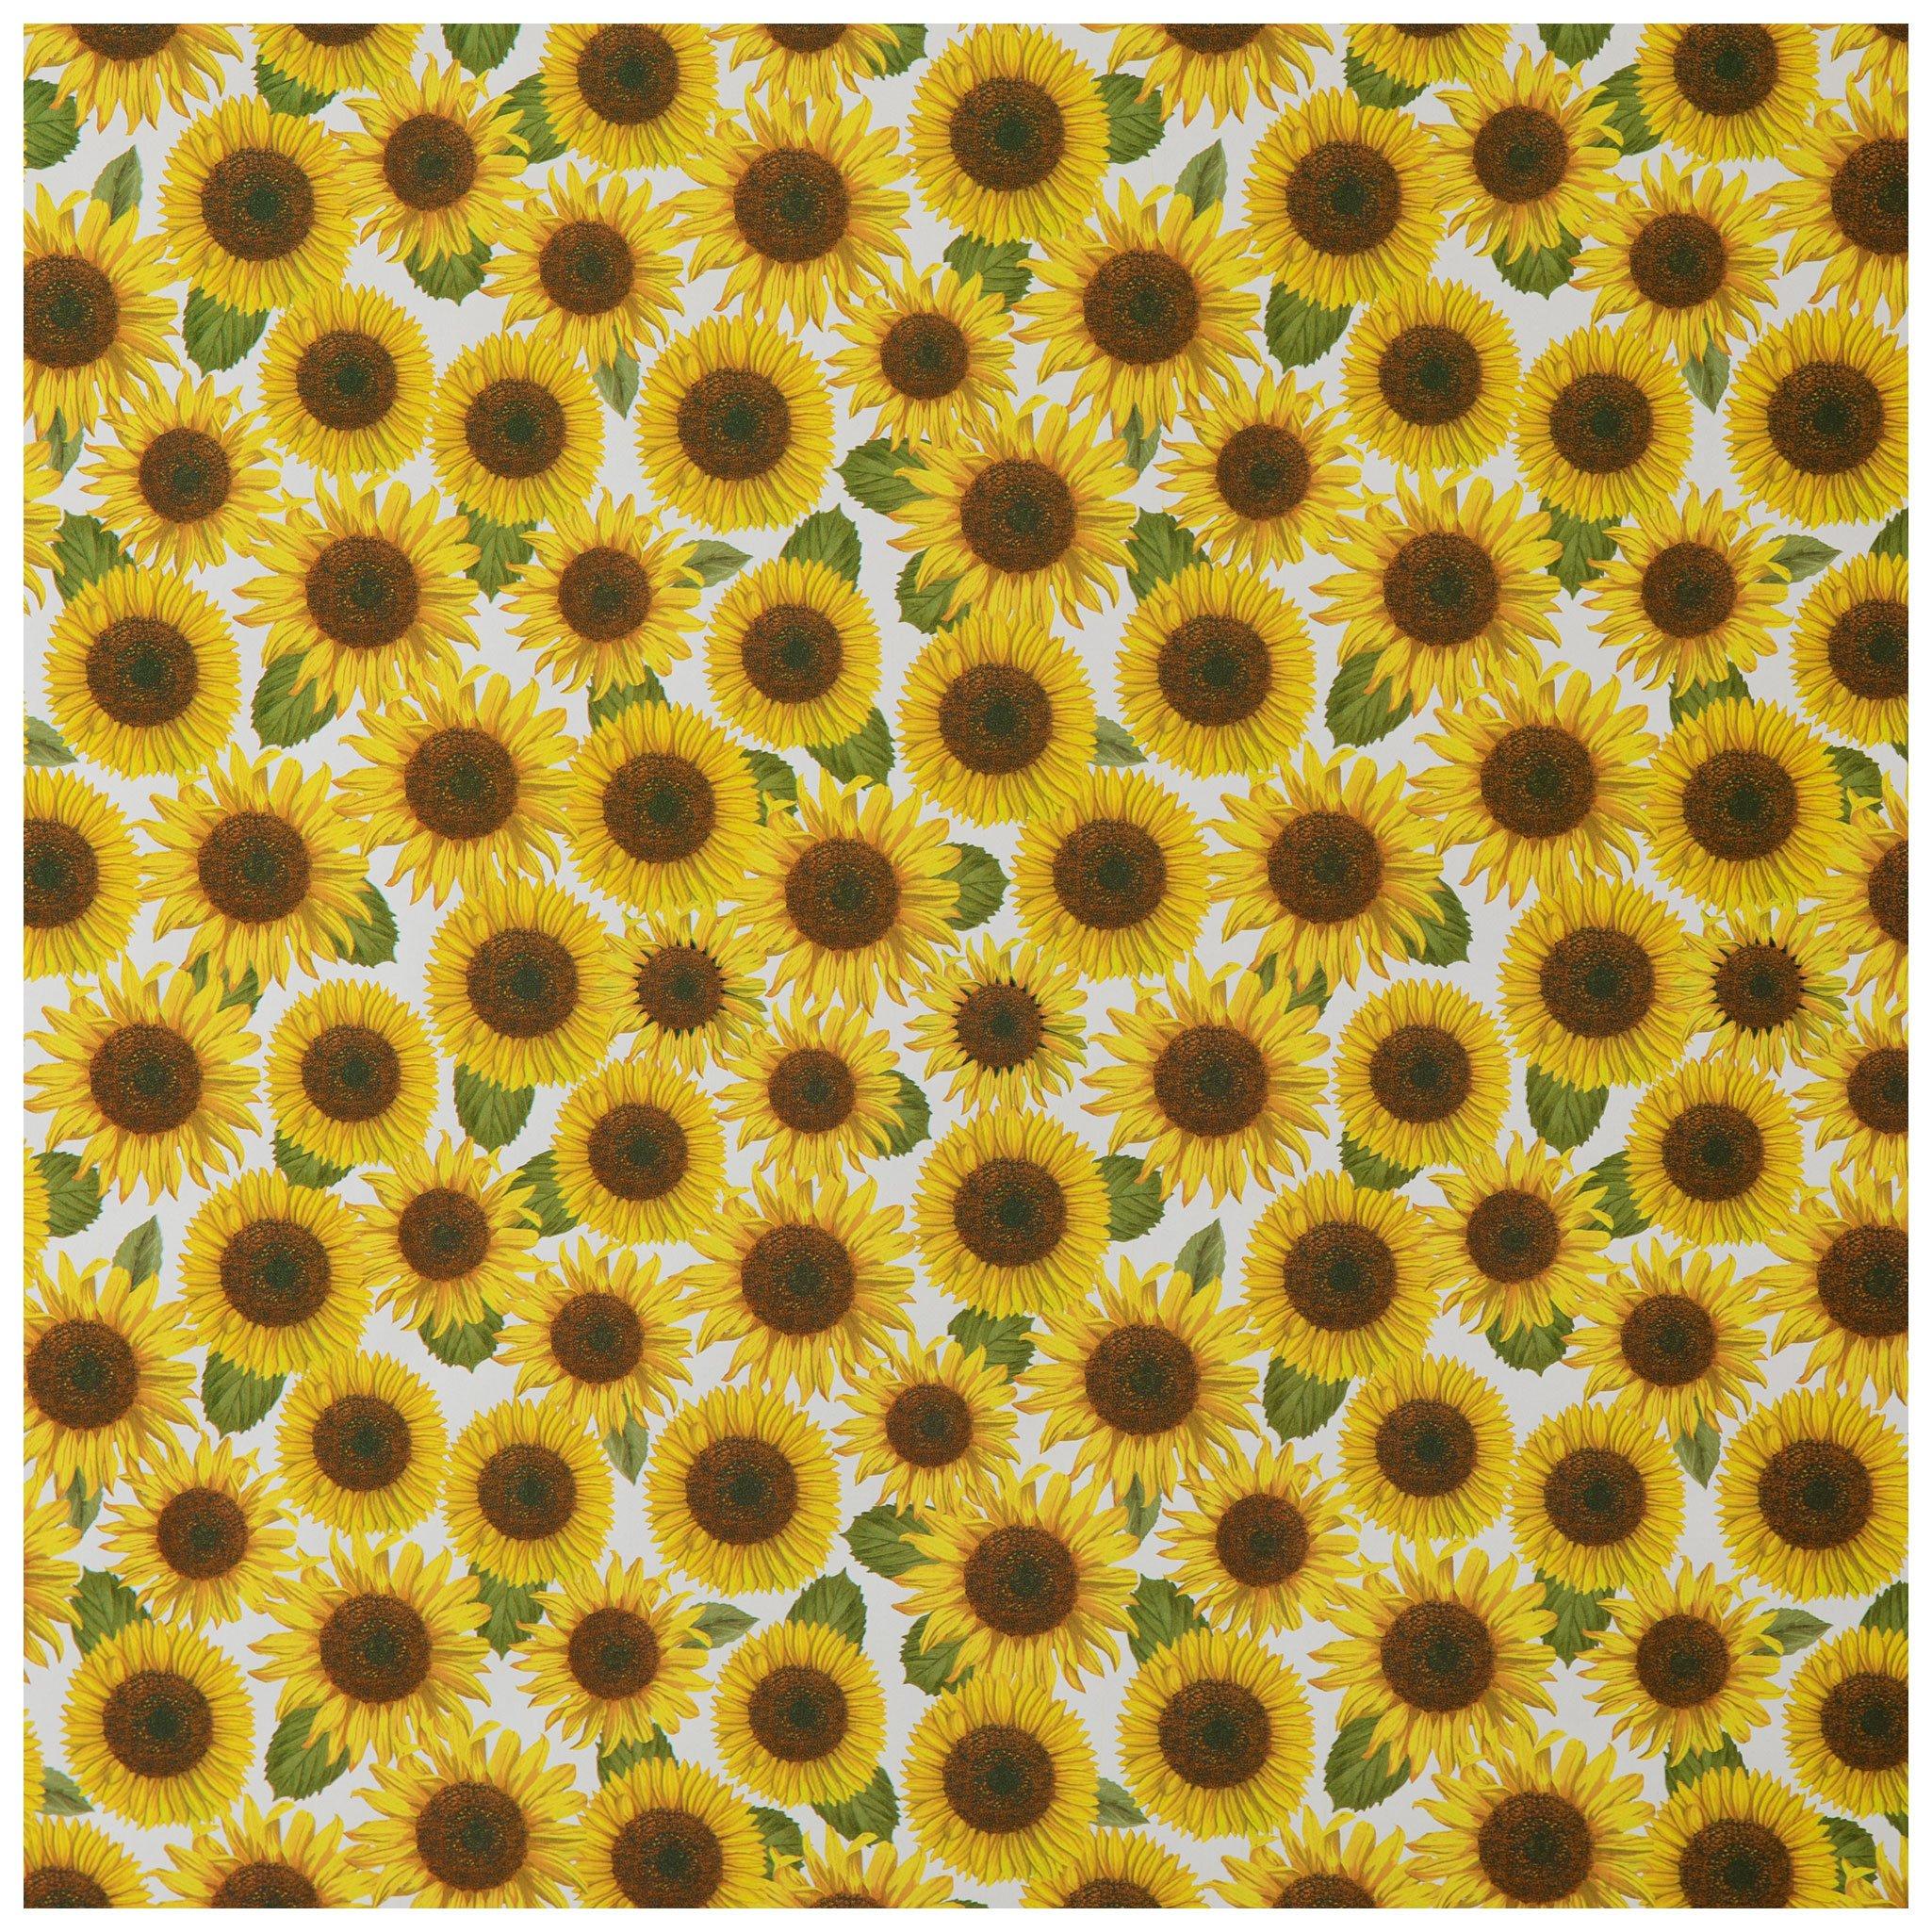 Floral Wrapping Paper - Sunflowers Gift Wrapping Paper - Blue